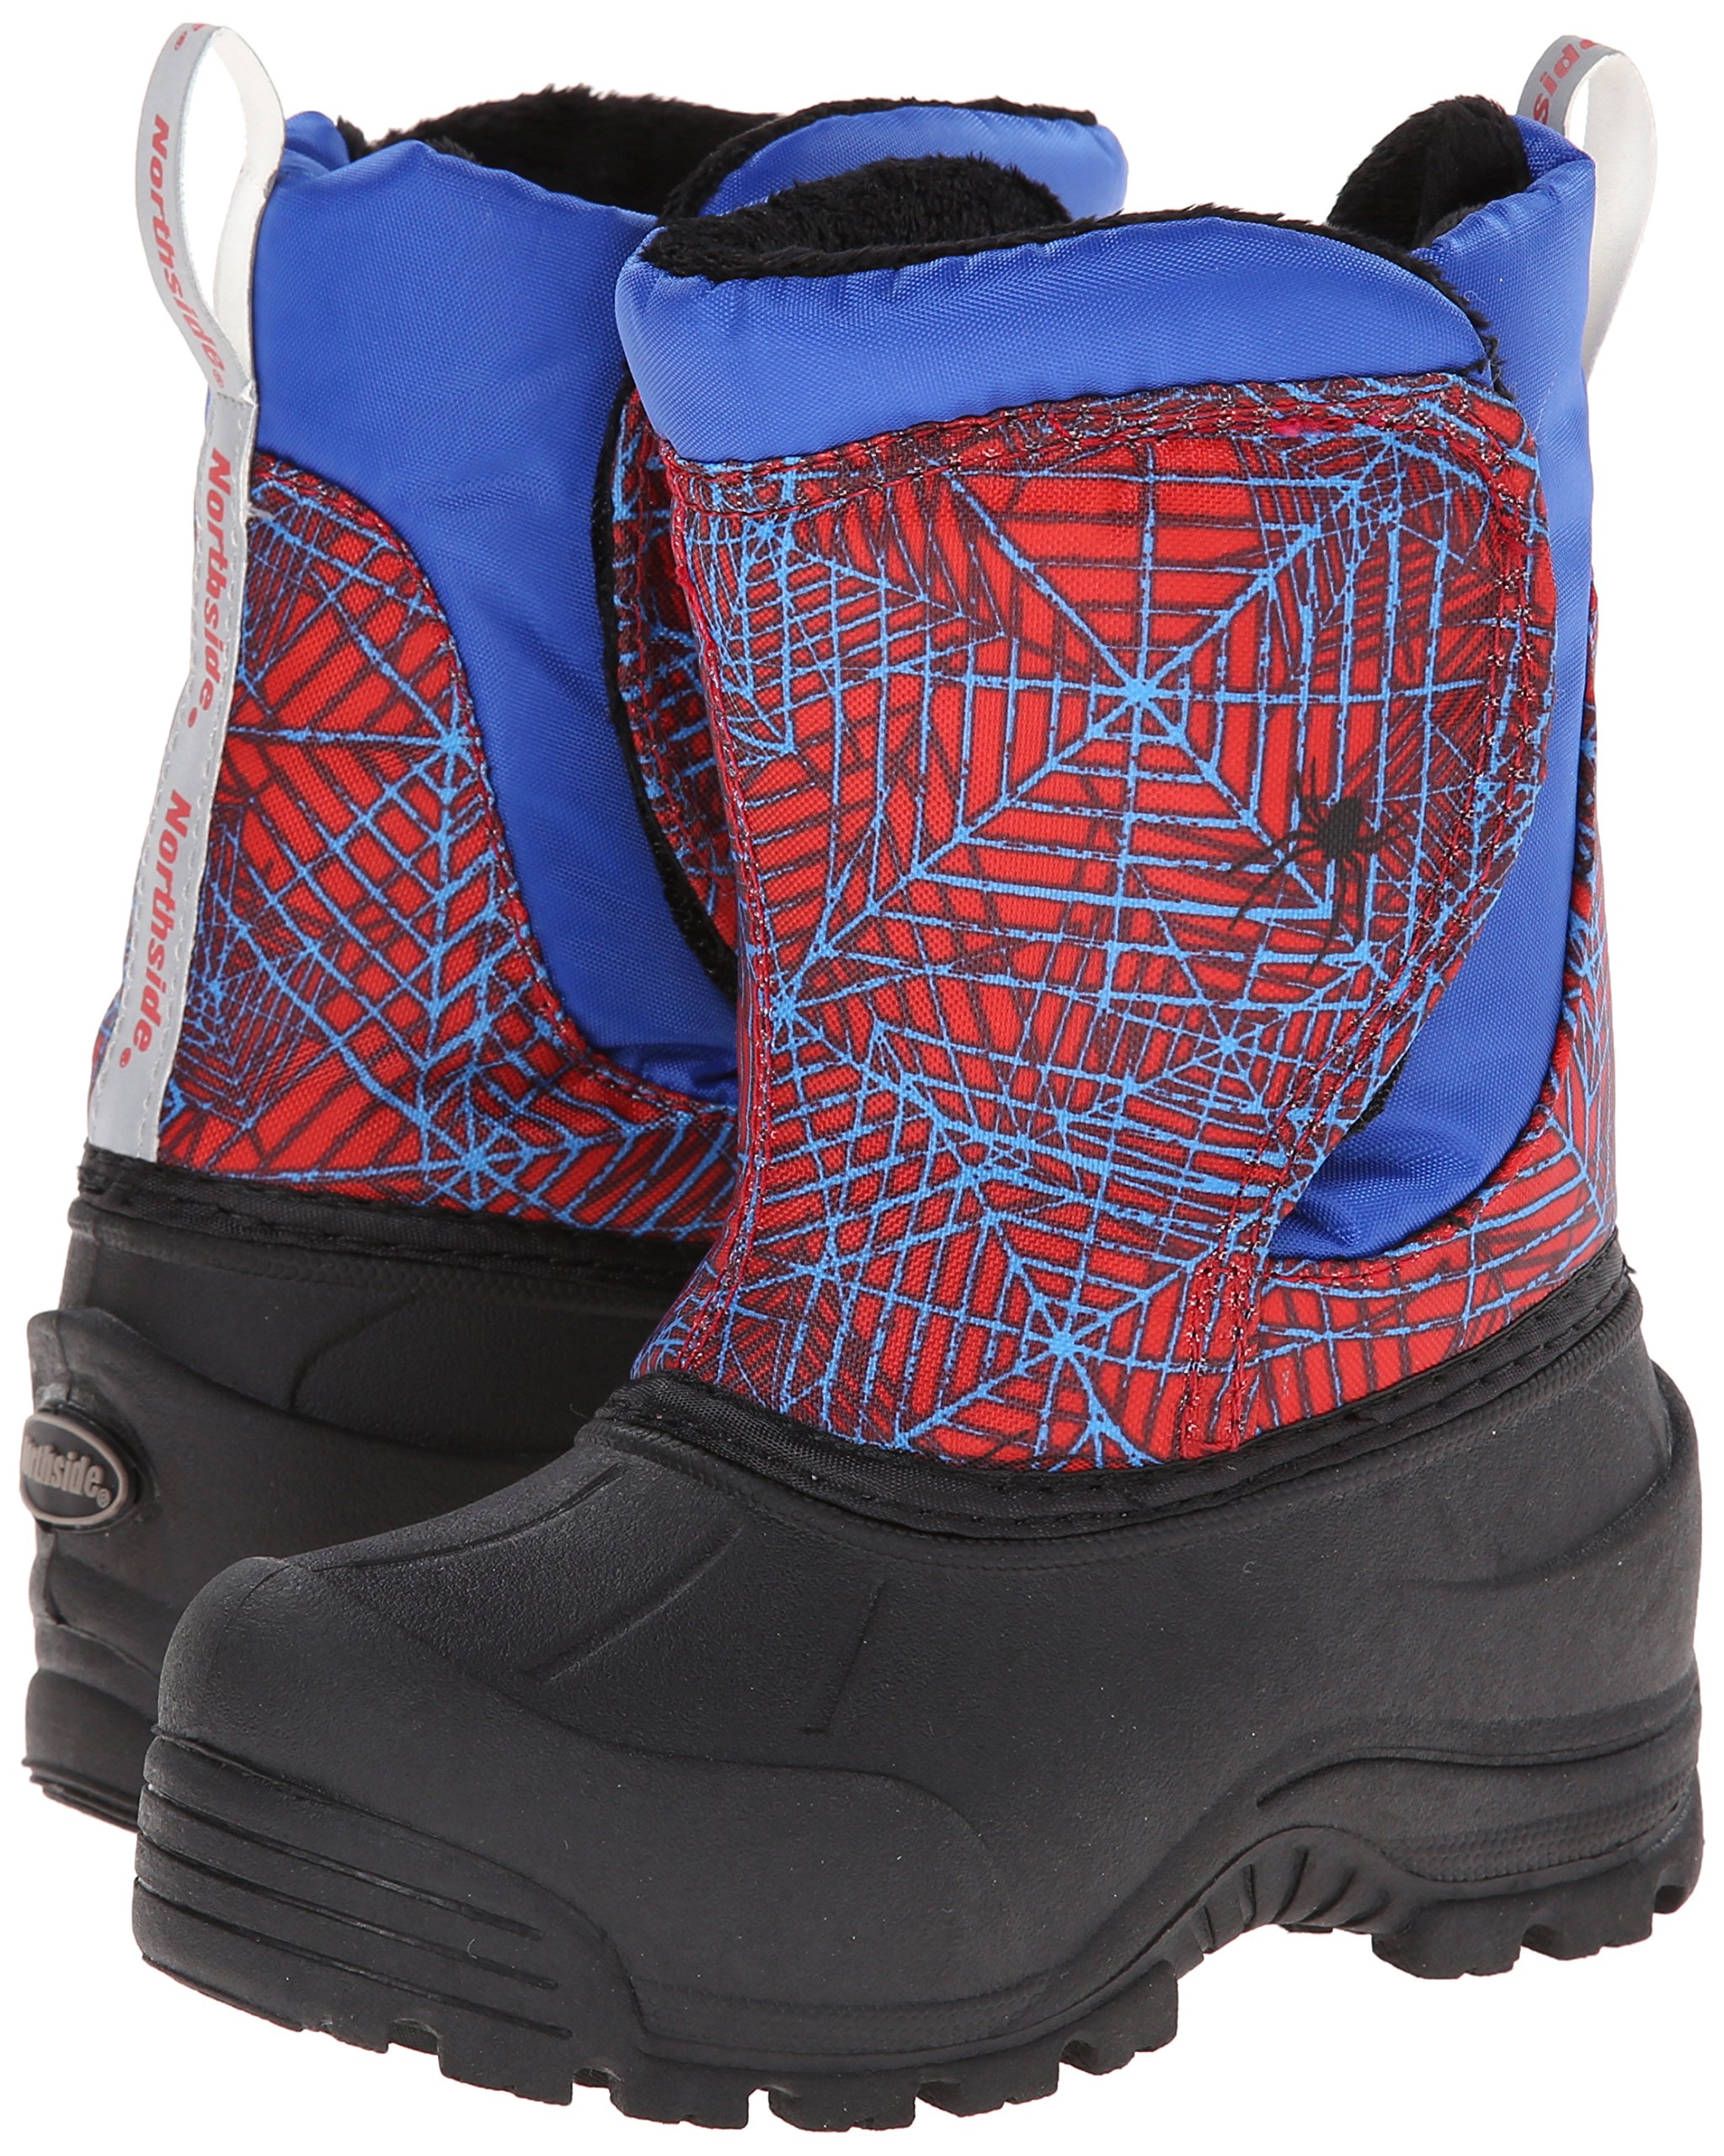 Northside Snoqualmie Winter Boot (Toddler)